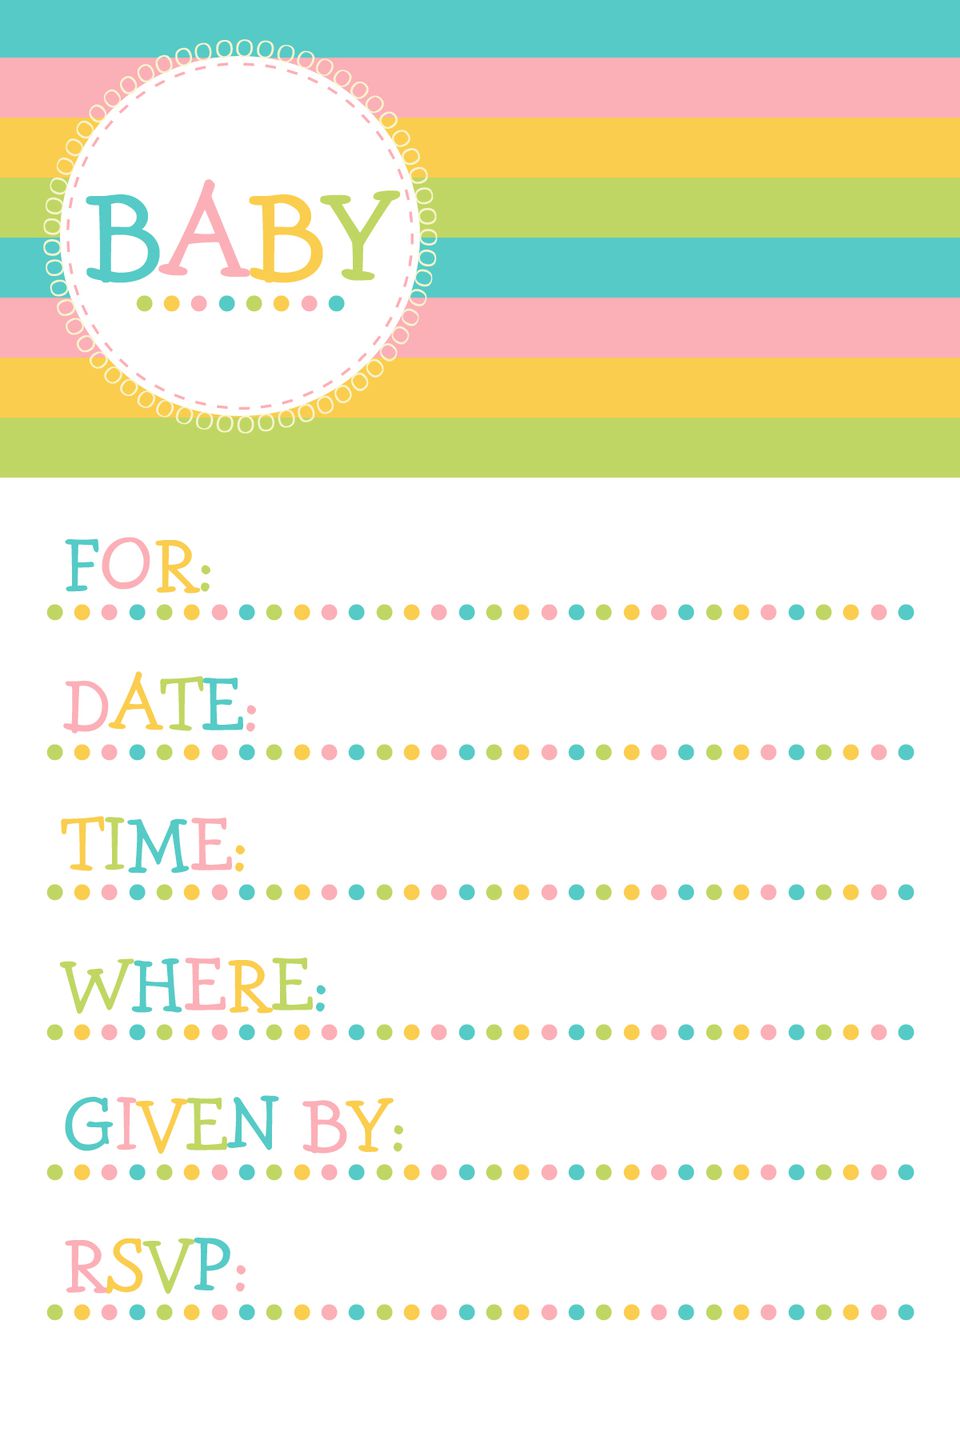 Full Size of Baby Shower:nautical Baby Shower Invitations For Boys Baby Girl Themes For Bedroom Baby Shower Ideas Baby Shower Decorations Themes For Baby Girl Nursery Elegant Baby Shower All Star Baby Shower Unique Baby Shower Decorations Girl Baby Shower Decorations